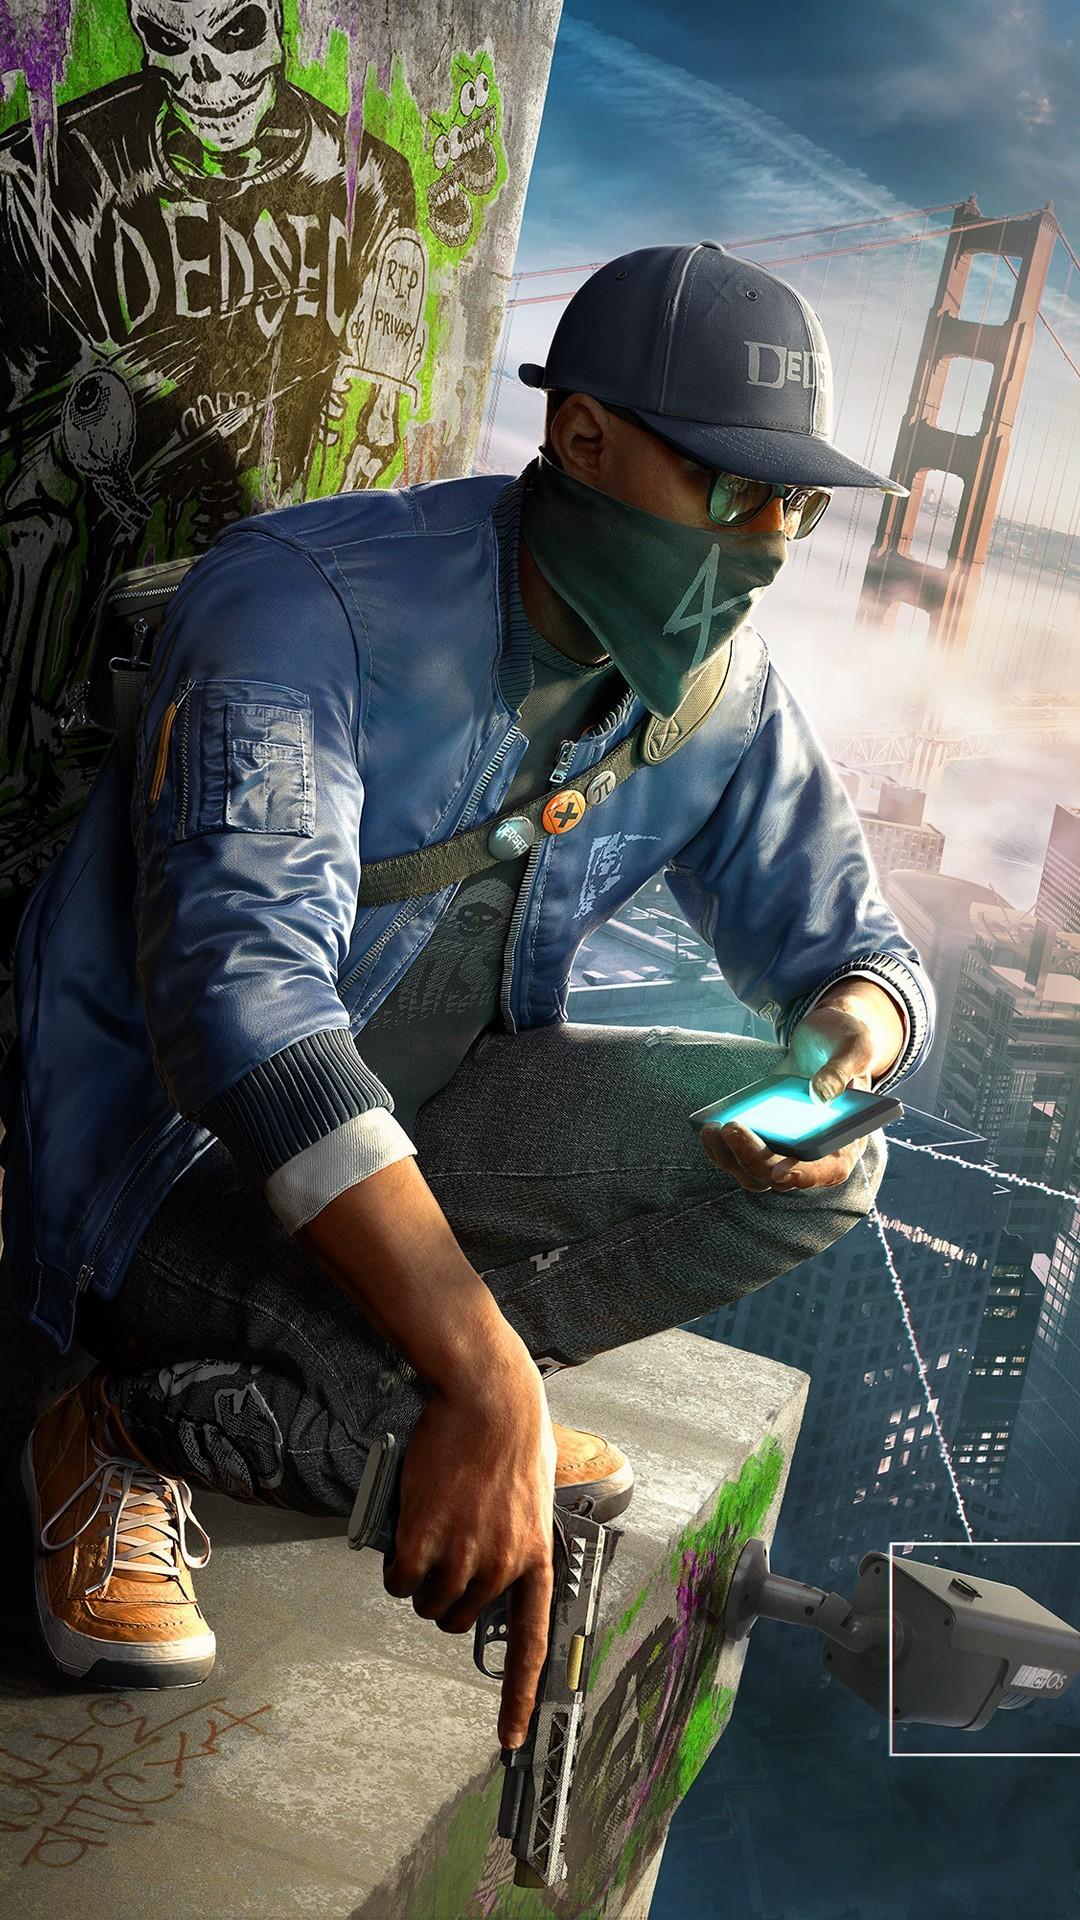 how to download watch dogs 2 on android